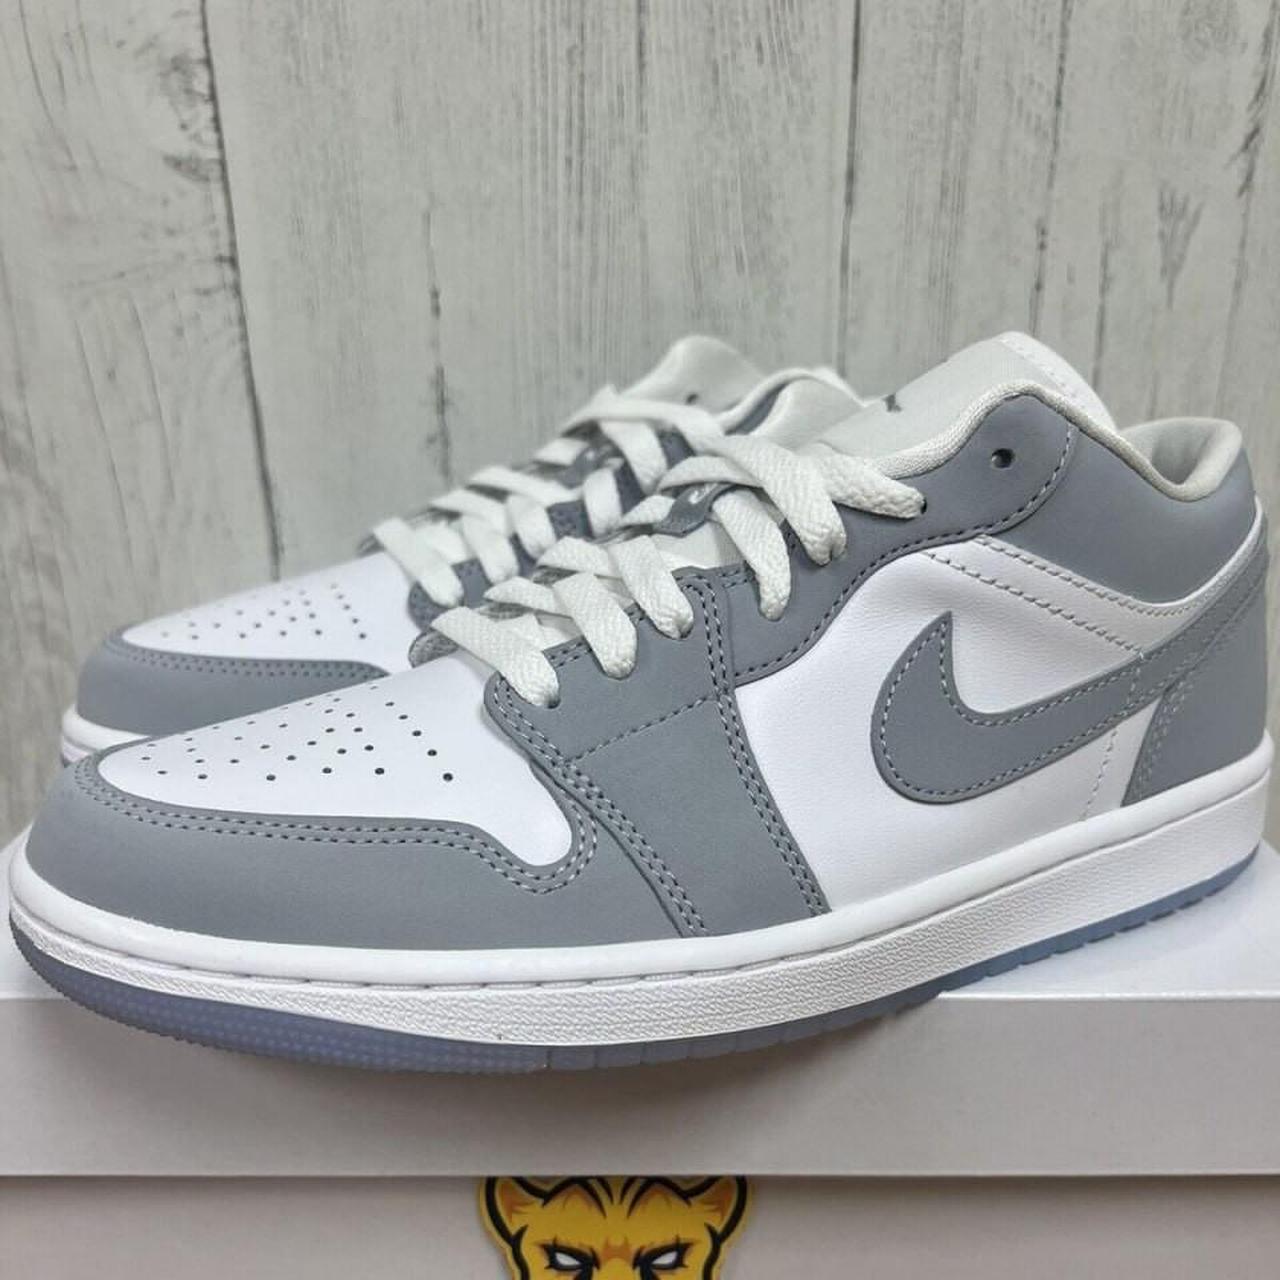 Air Jordan 1 Low Grey All pairs are new with... - Depop